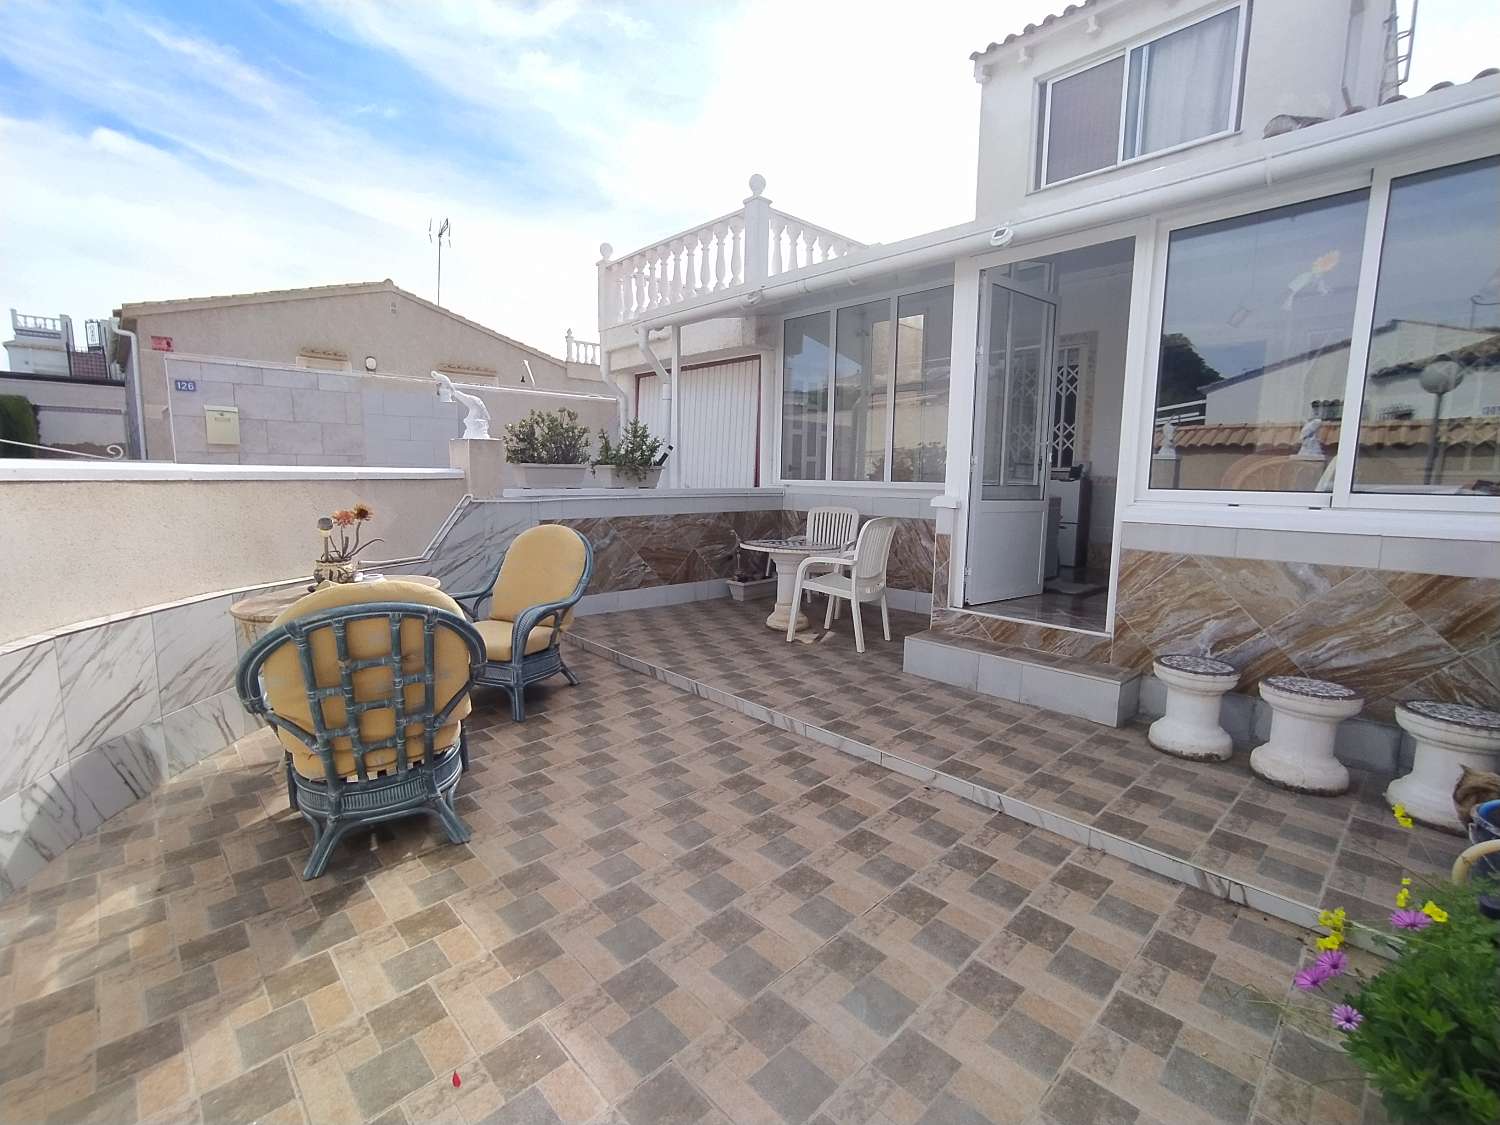 Semi-detached villa with 3 bedrooms and 2 bathrooms with separate apartment